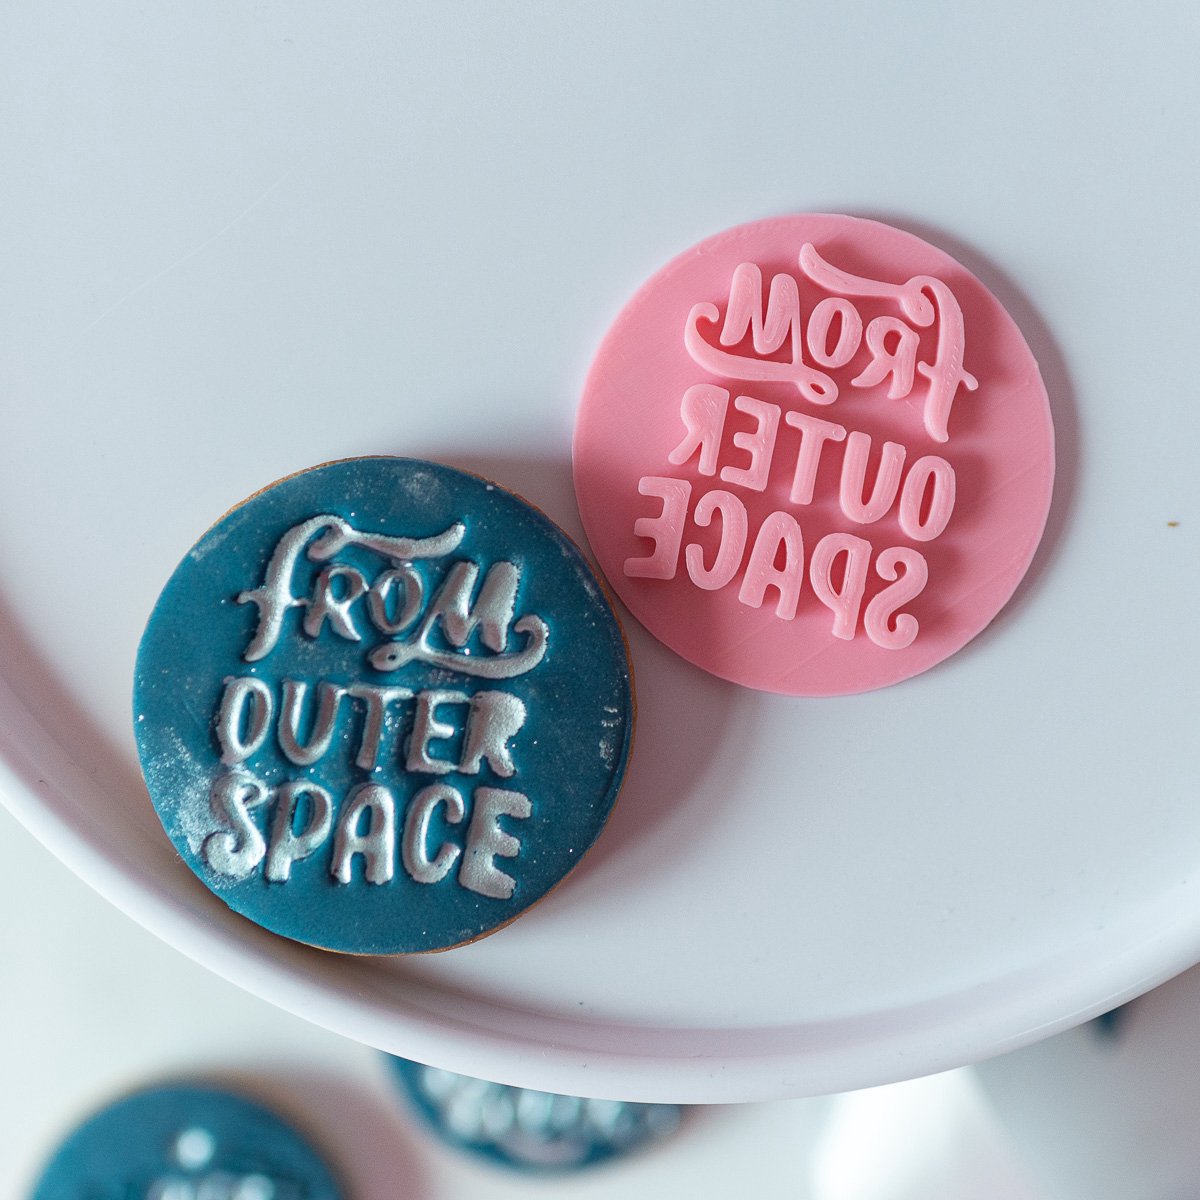 From outer space - Stamp | Space collectie